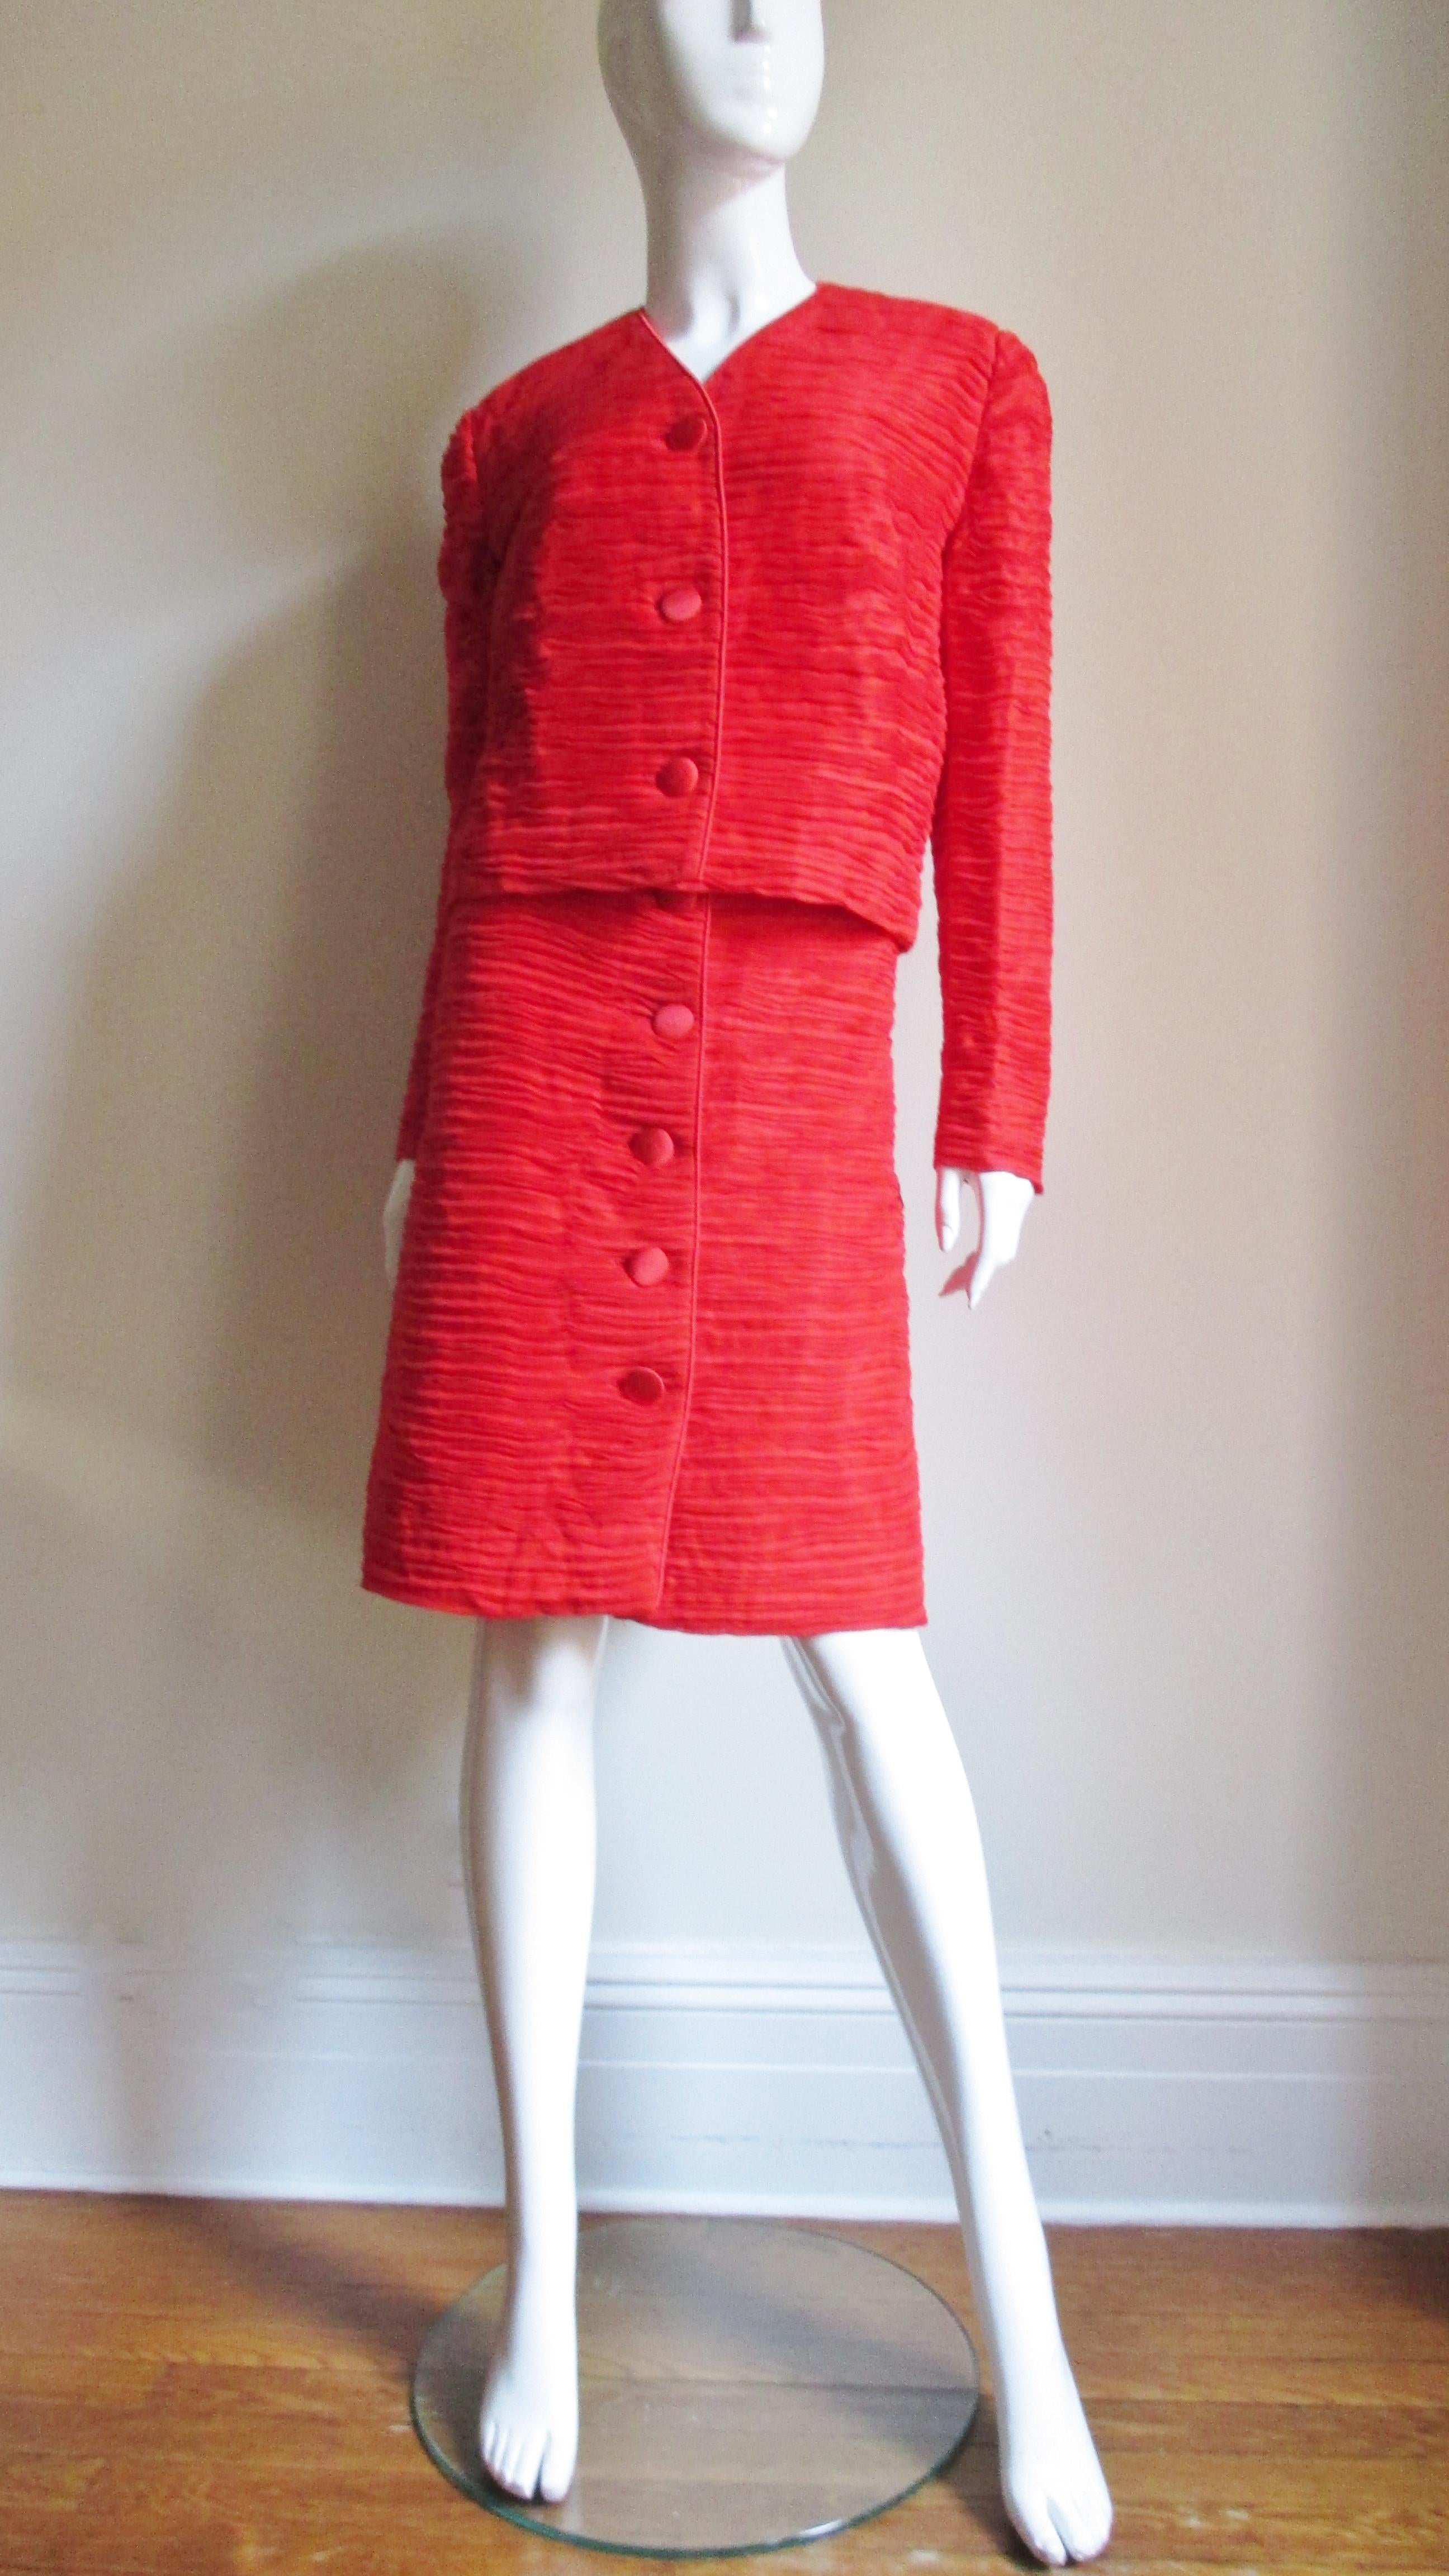 Sybil Connolly Skirt Suit 1960s In Excellent Condition For Sale In Water Mill, NY